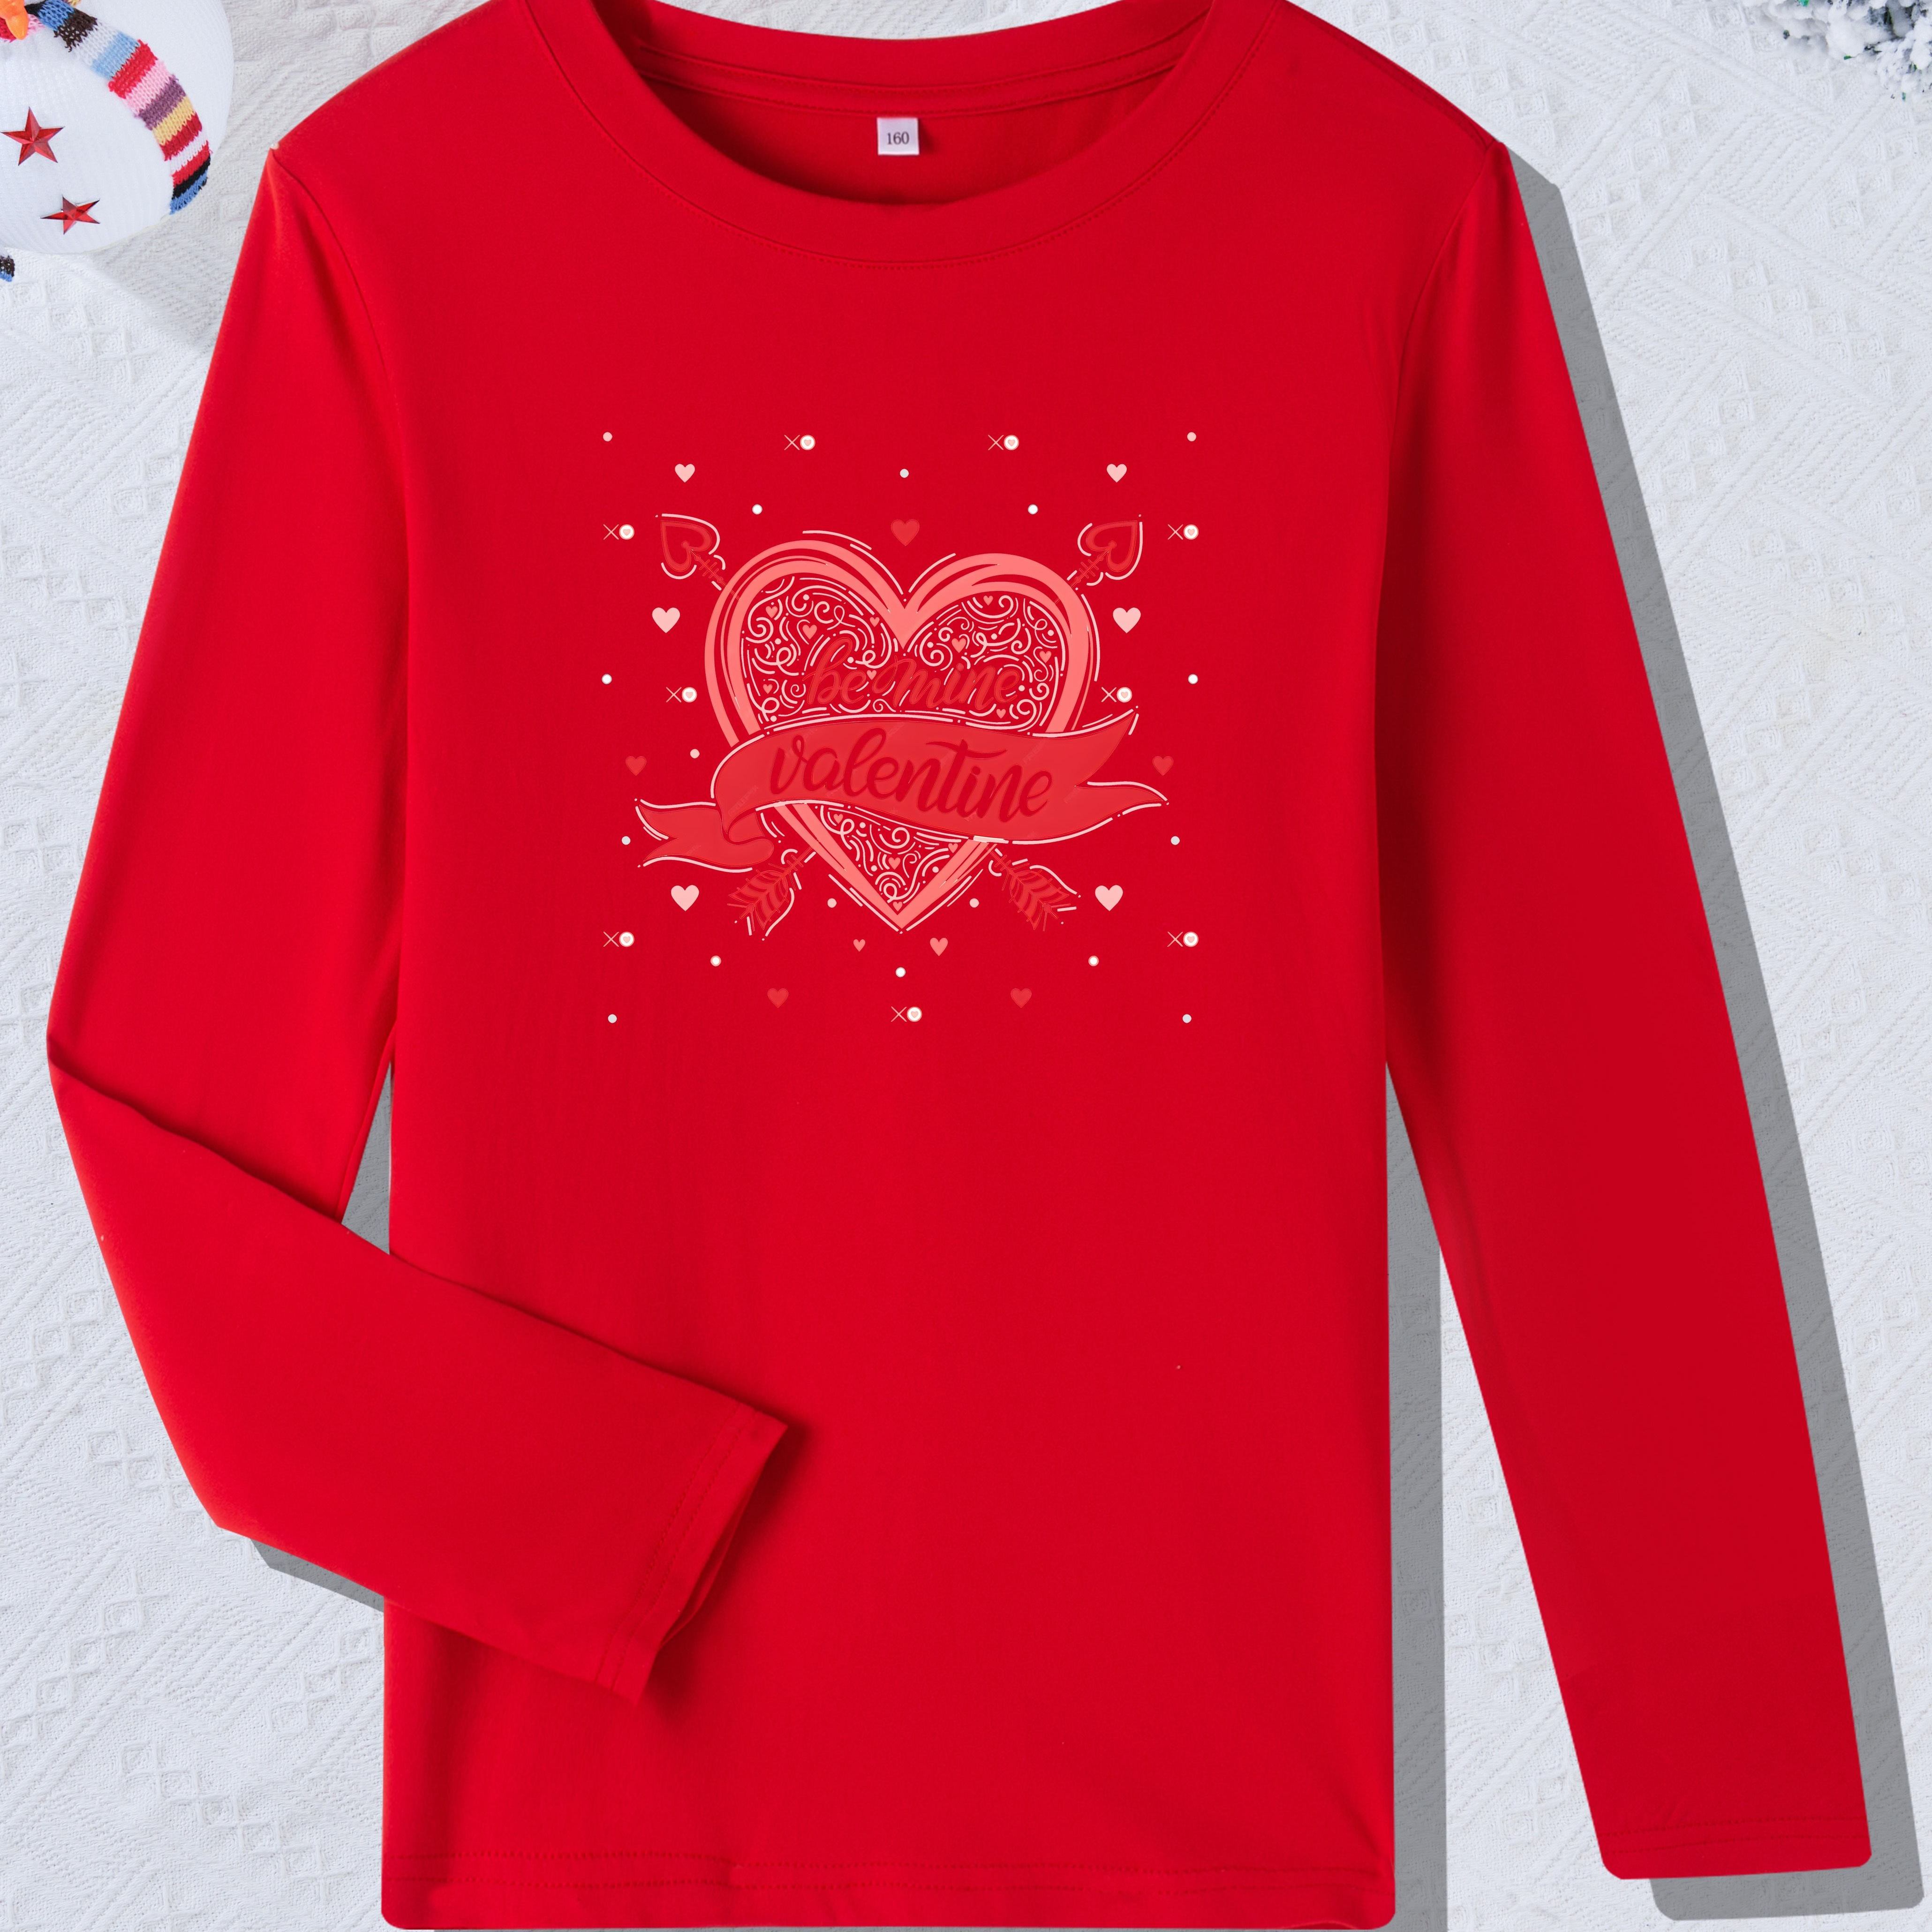 

Happy Valentine's Day Heart Print Girls Fashion Long Sleeve Shirts, Casual Comfortable And Skin Friendly Bottoming Shirts, Casual Graphic Tops For Girls